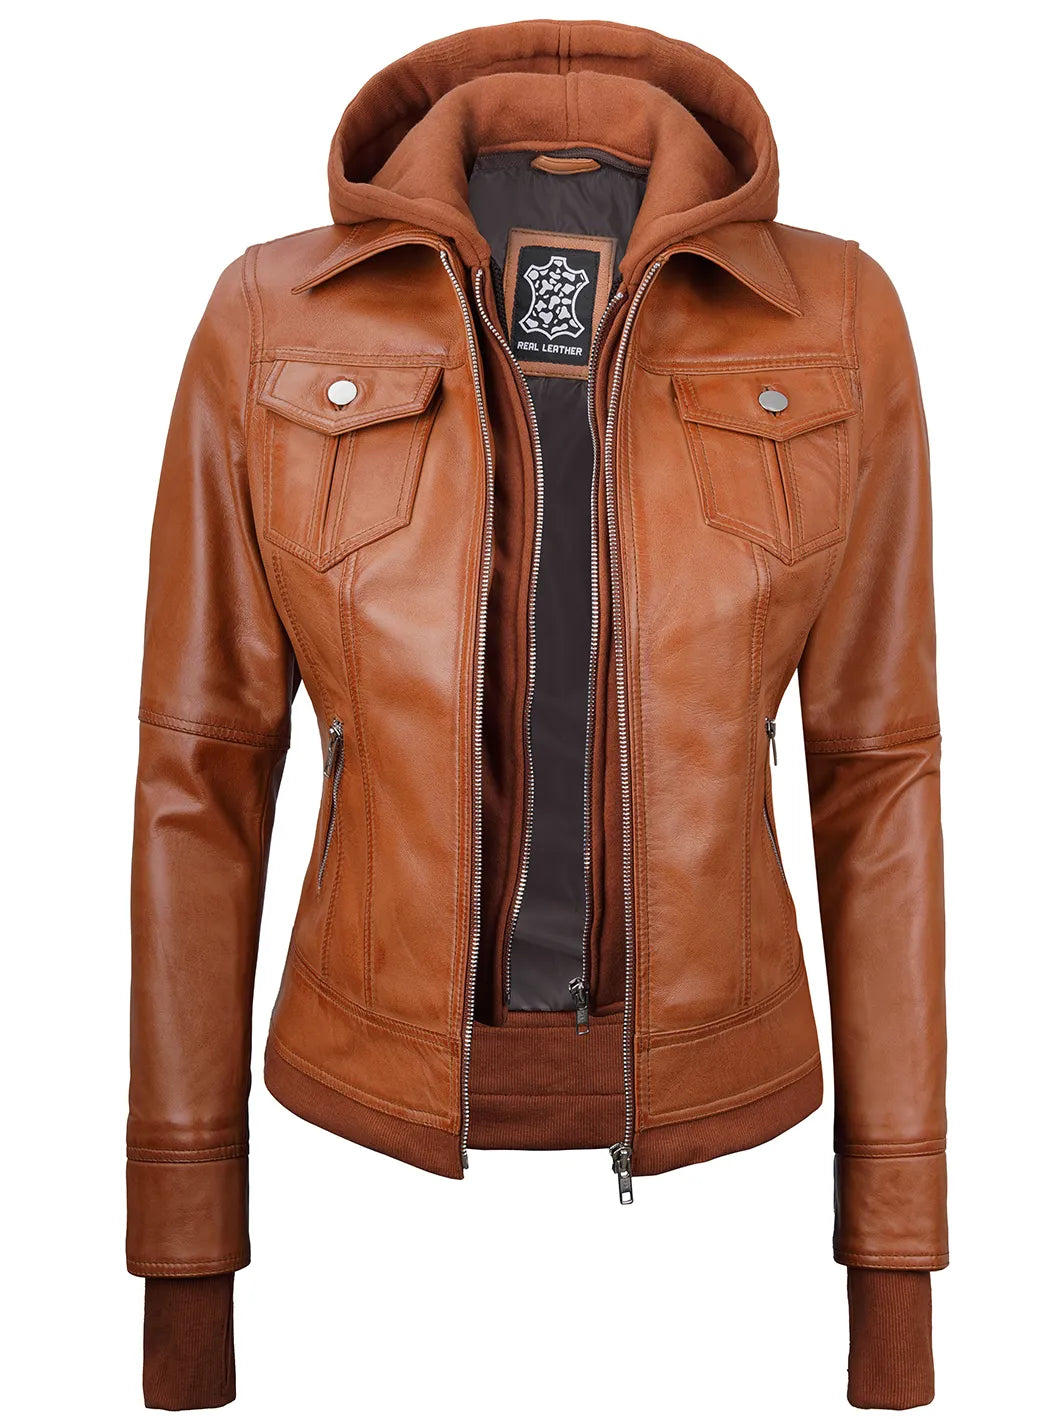 Tralee leather jacket for women